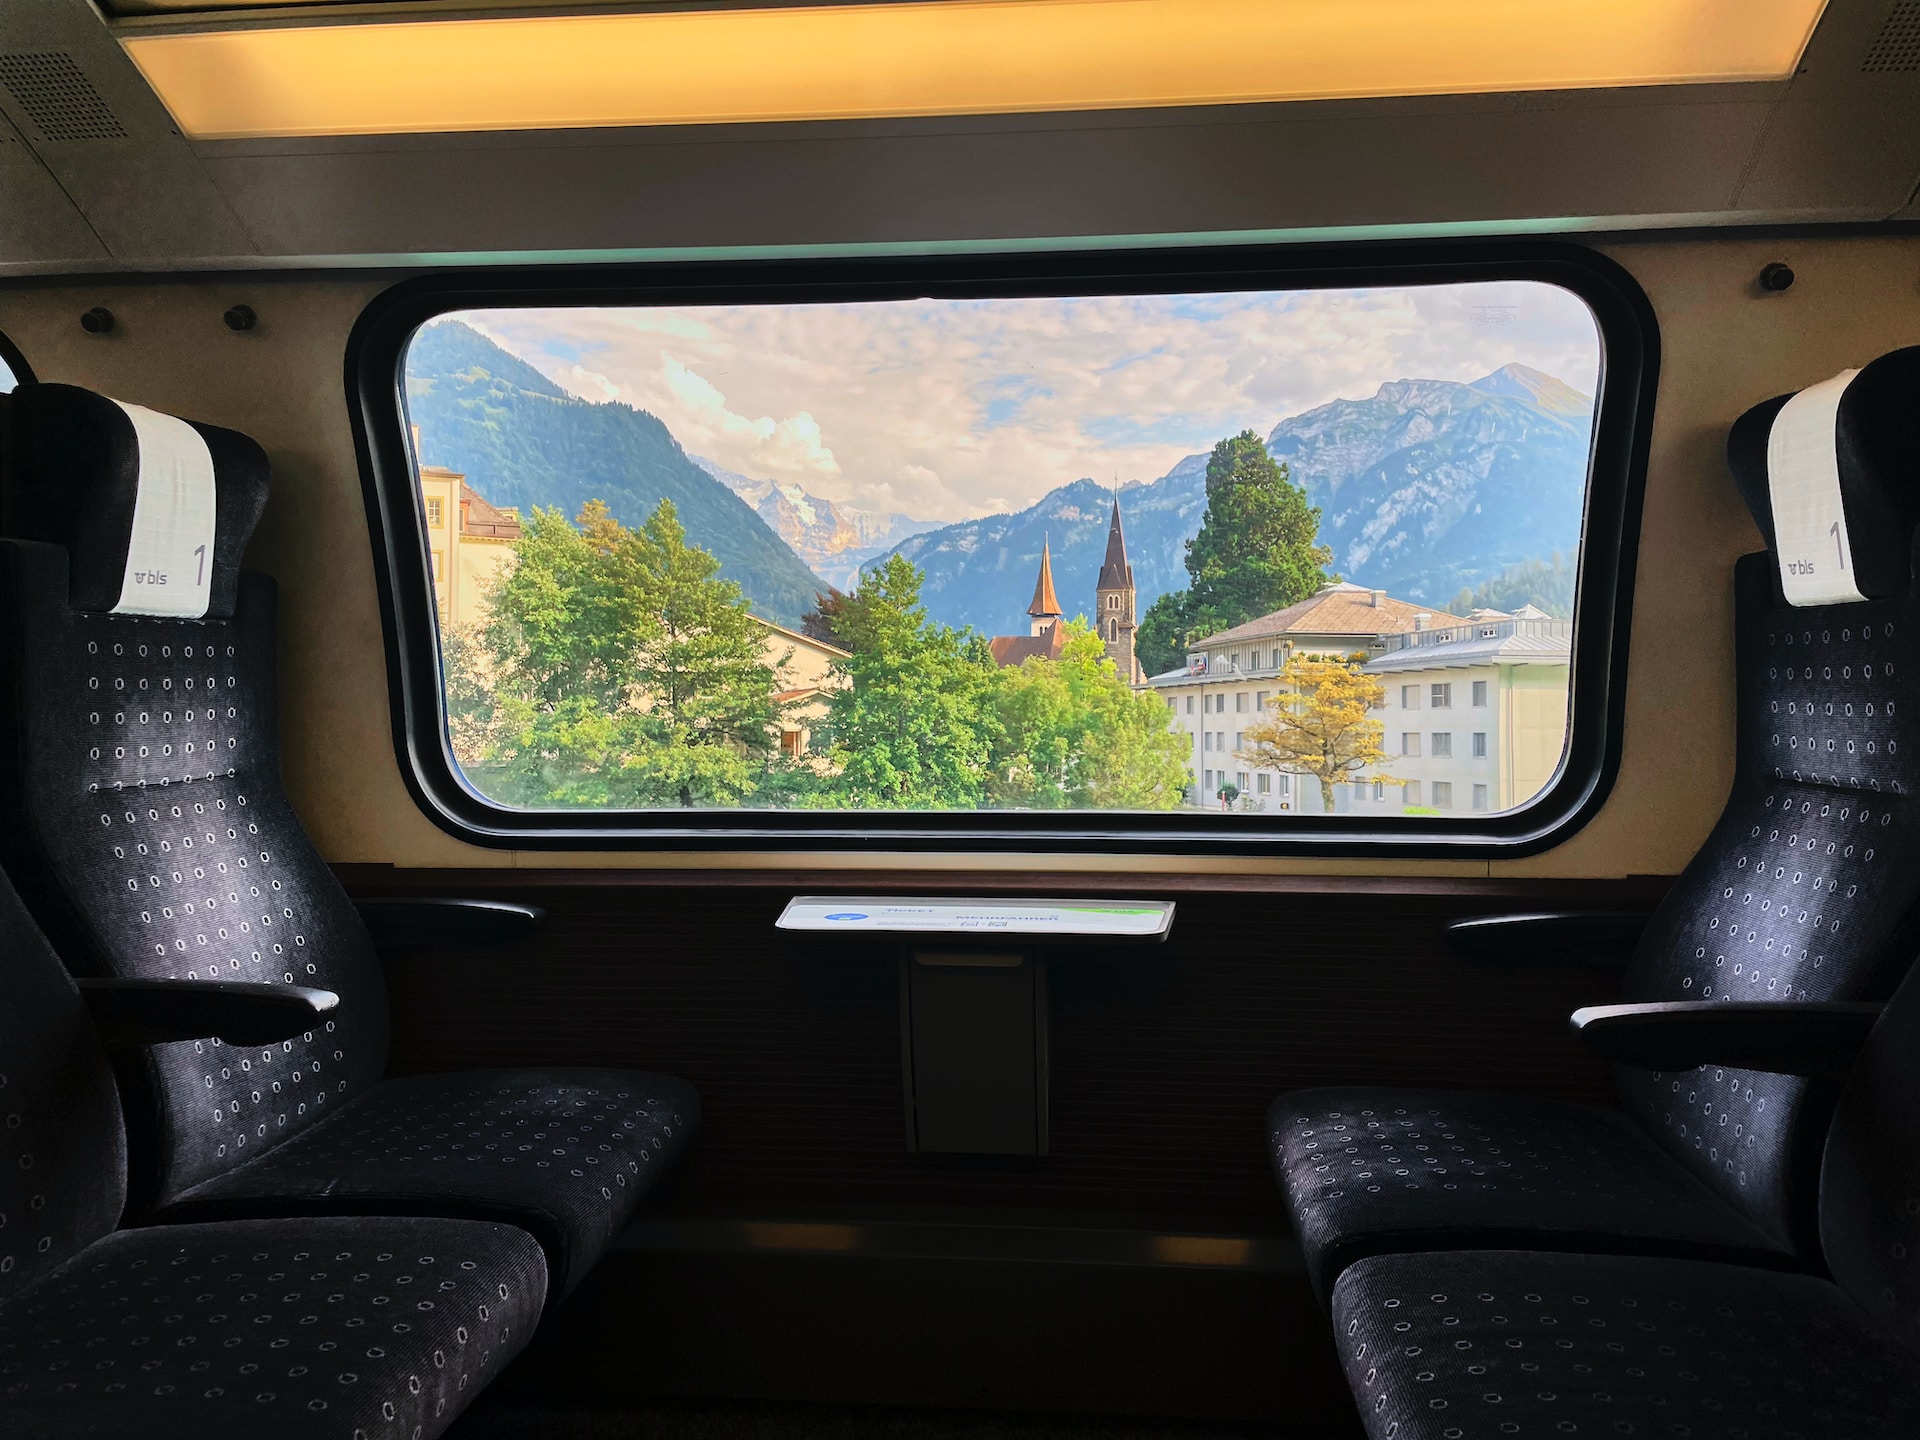 The Art Of Luxury Train Travel: Fine Dining, Spa Services, And More On European Trains